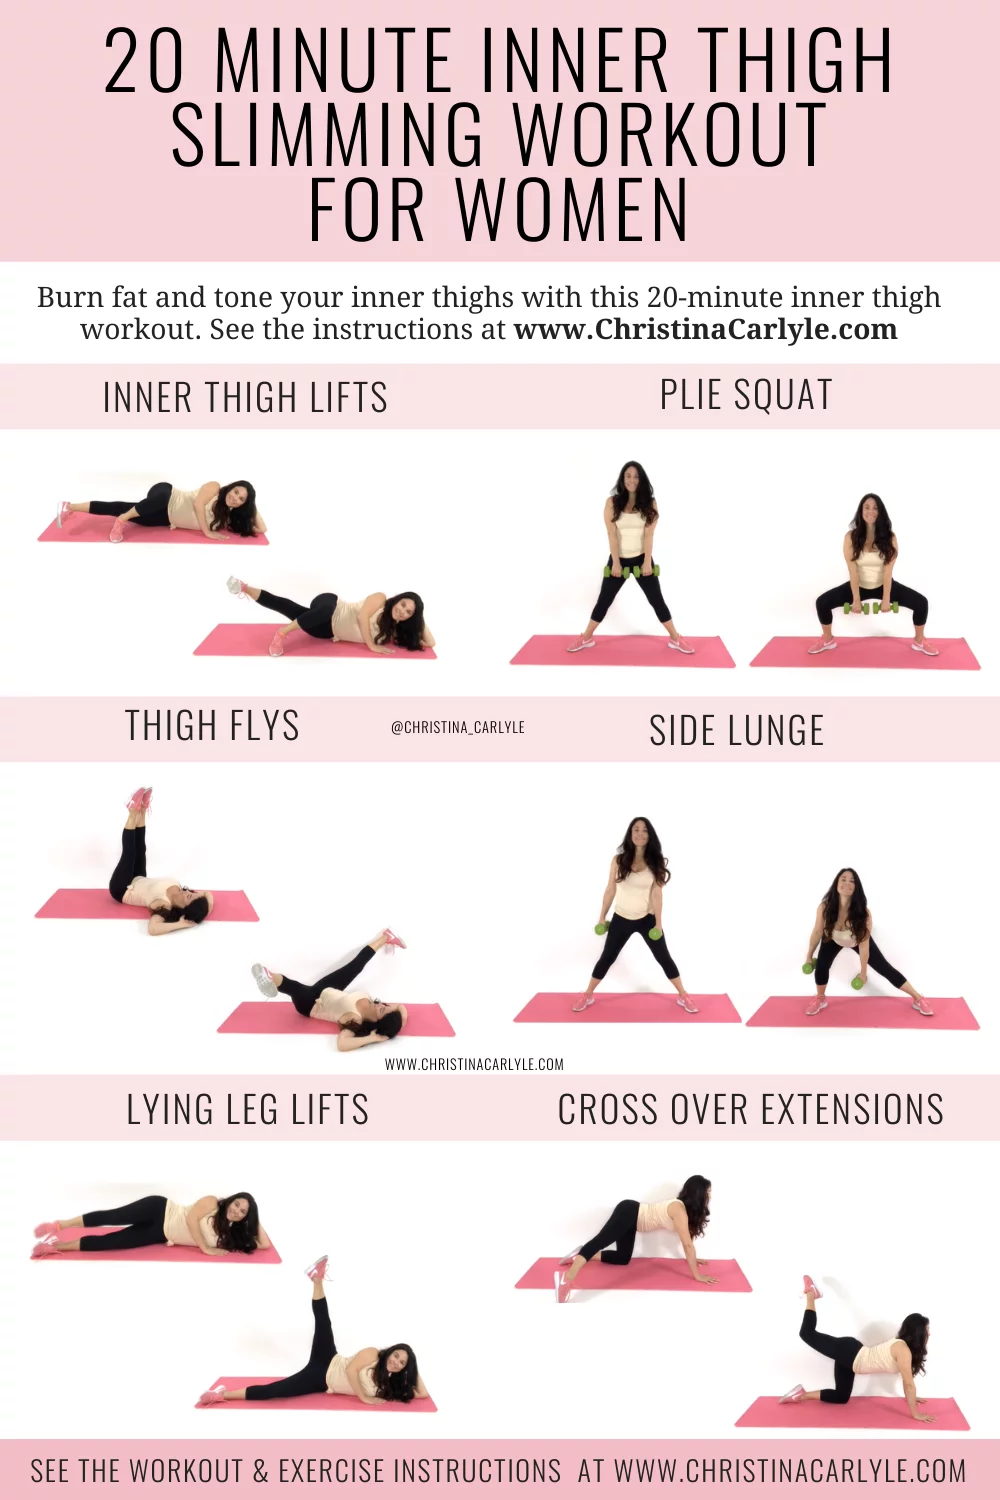 trainer Christina Carlyle doing 6 inner thigh exercises and text that says 20 minute inner thigh slimming workout for women